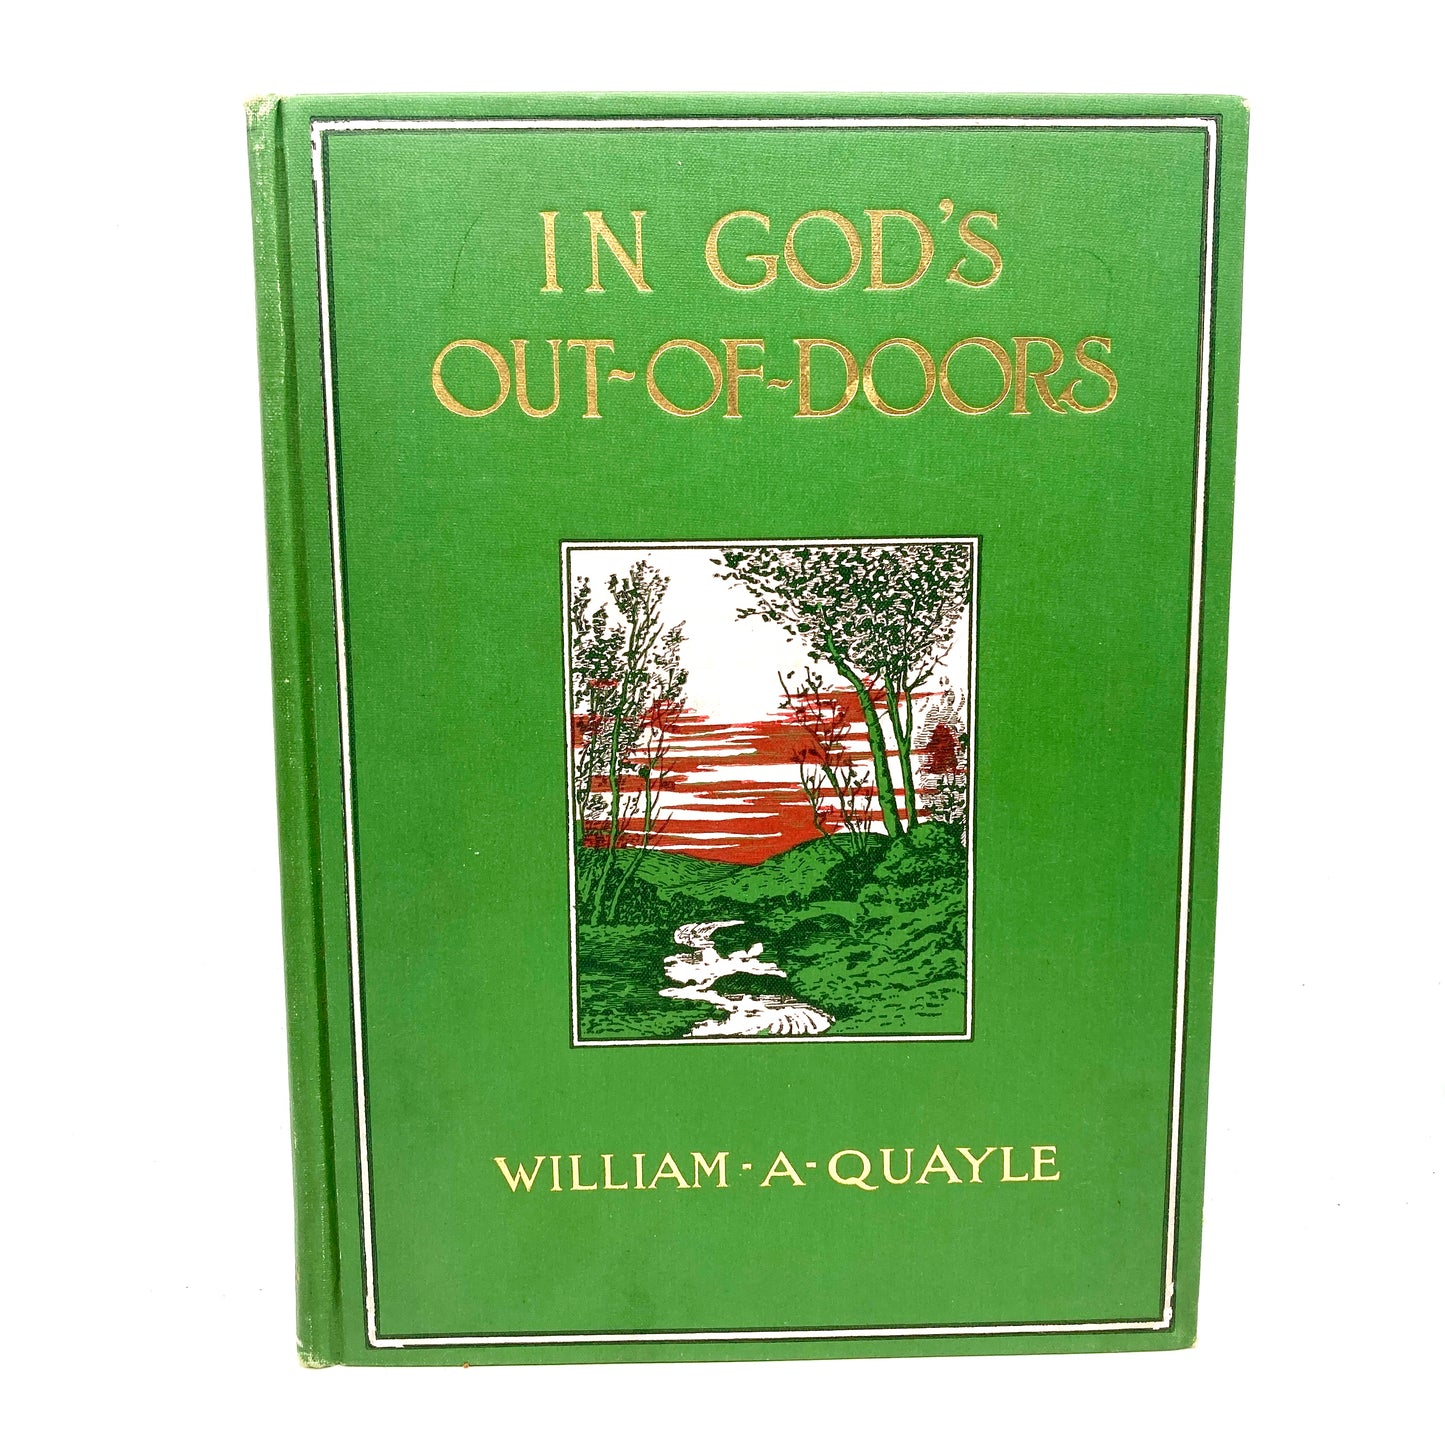 QUAYLE, William A. "In God's Out-of-Doors" [The Abingdon Press, 1924]